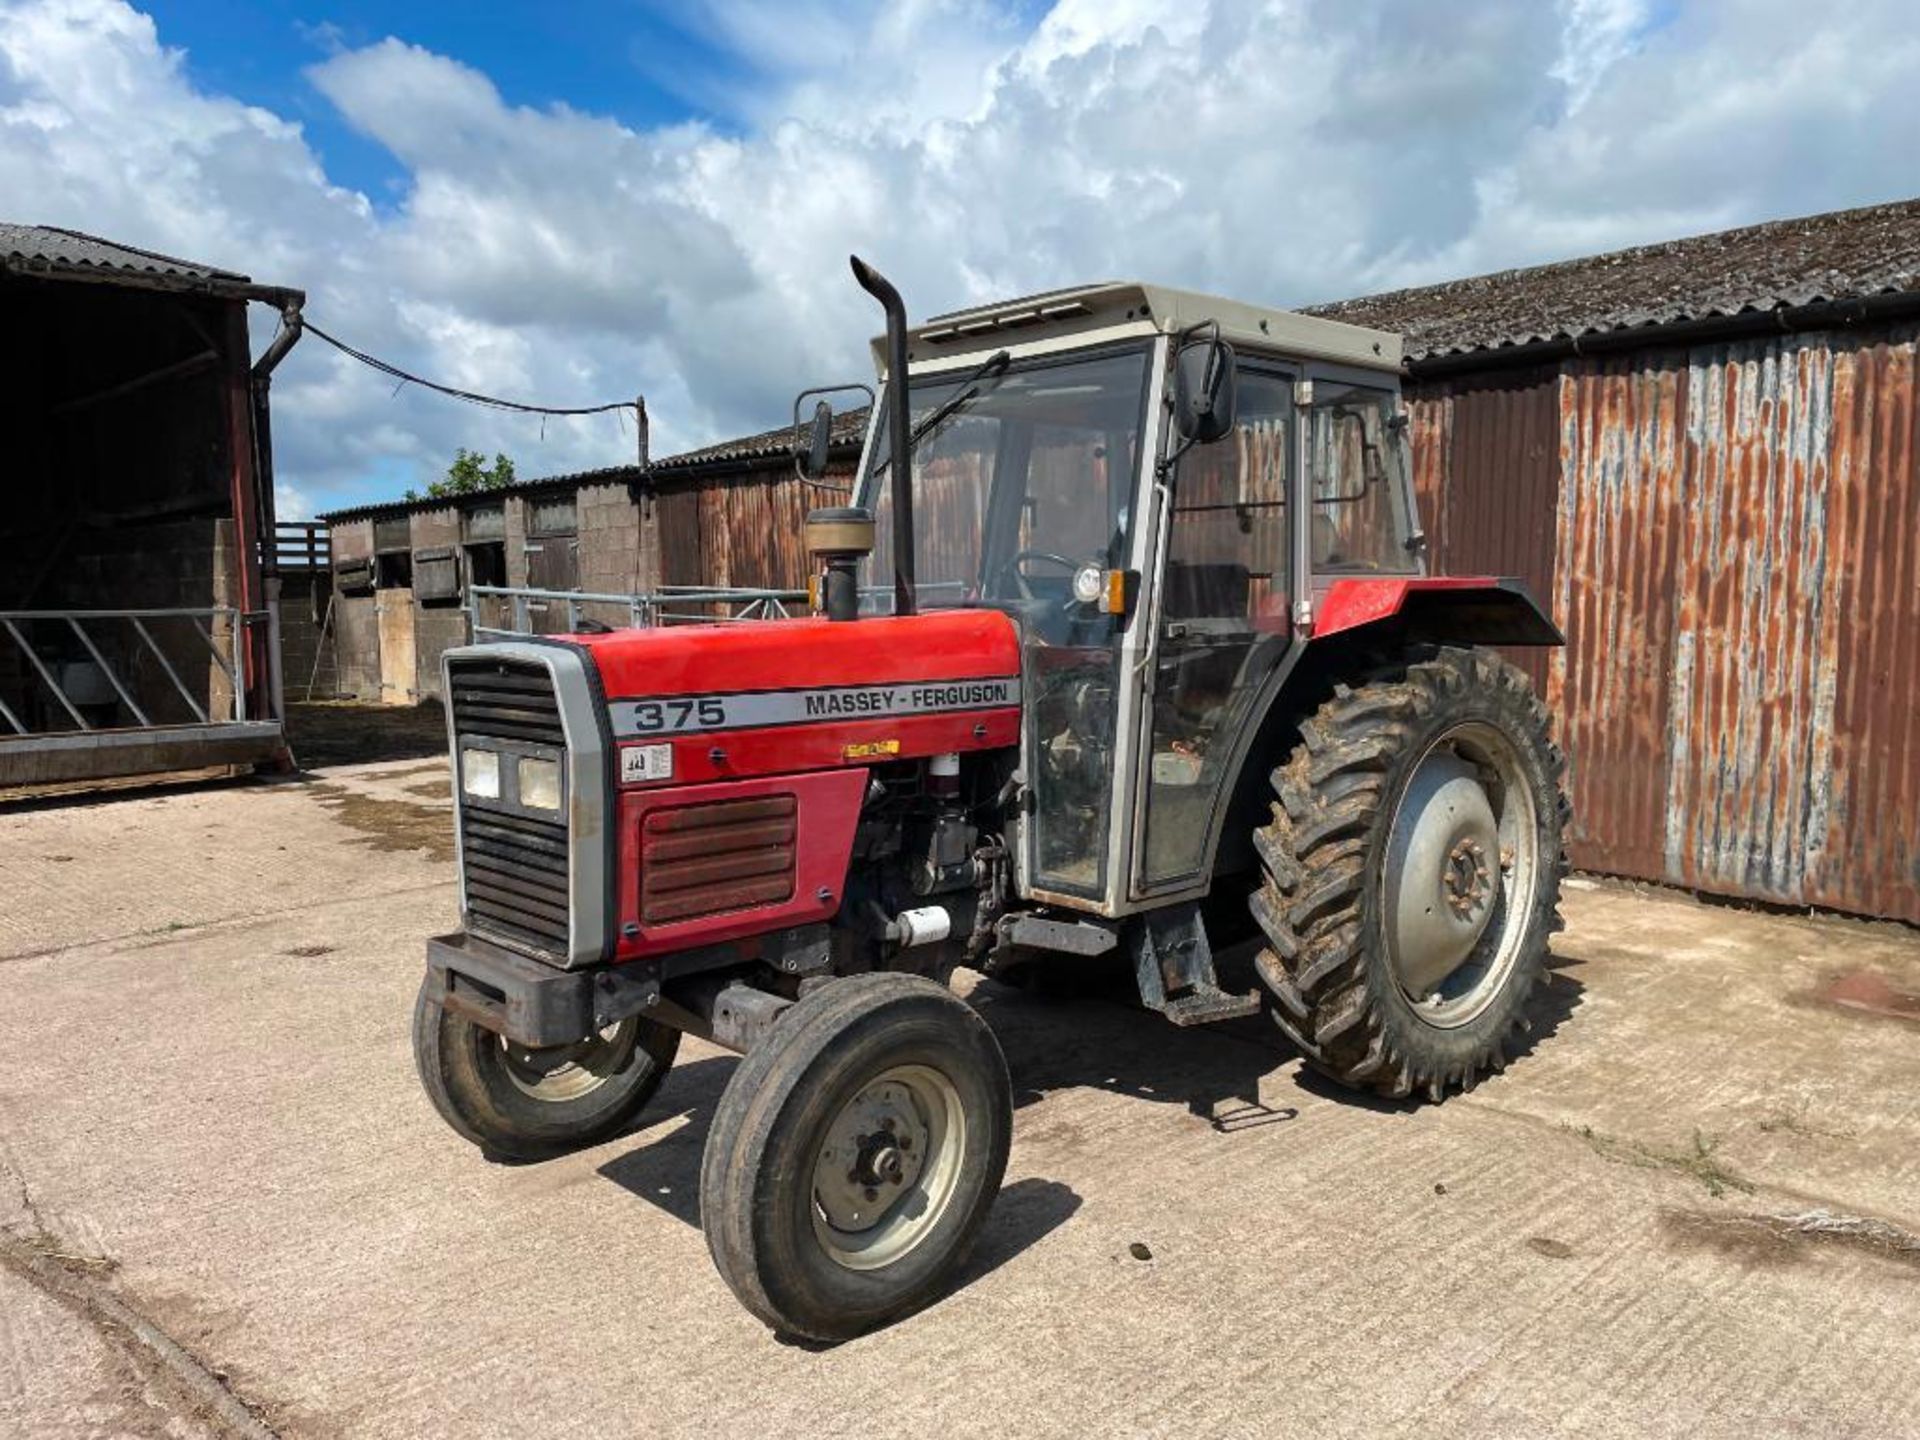 1990 Massey Ferguson 375 2wd tractor, 2 manual spools on Firestone 7.5-16 front and Firestone 13.6-3 - Image 17 of 24